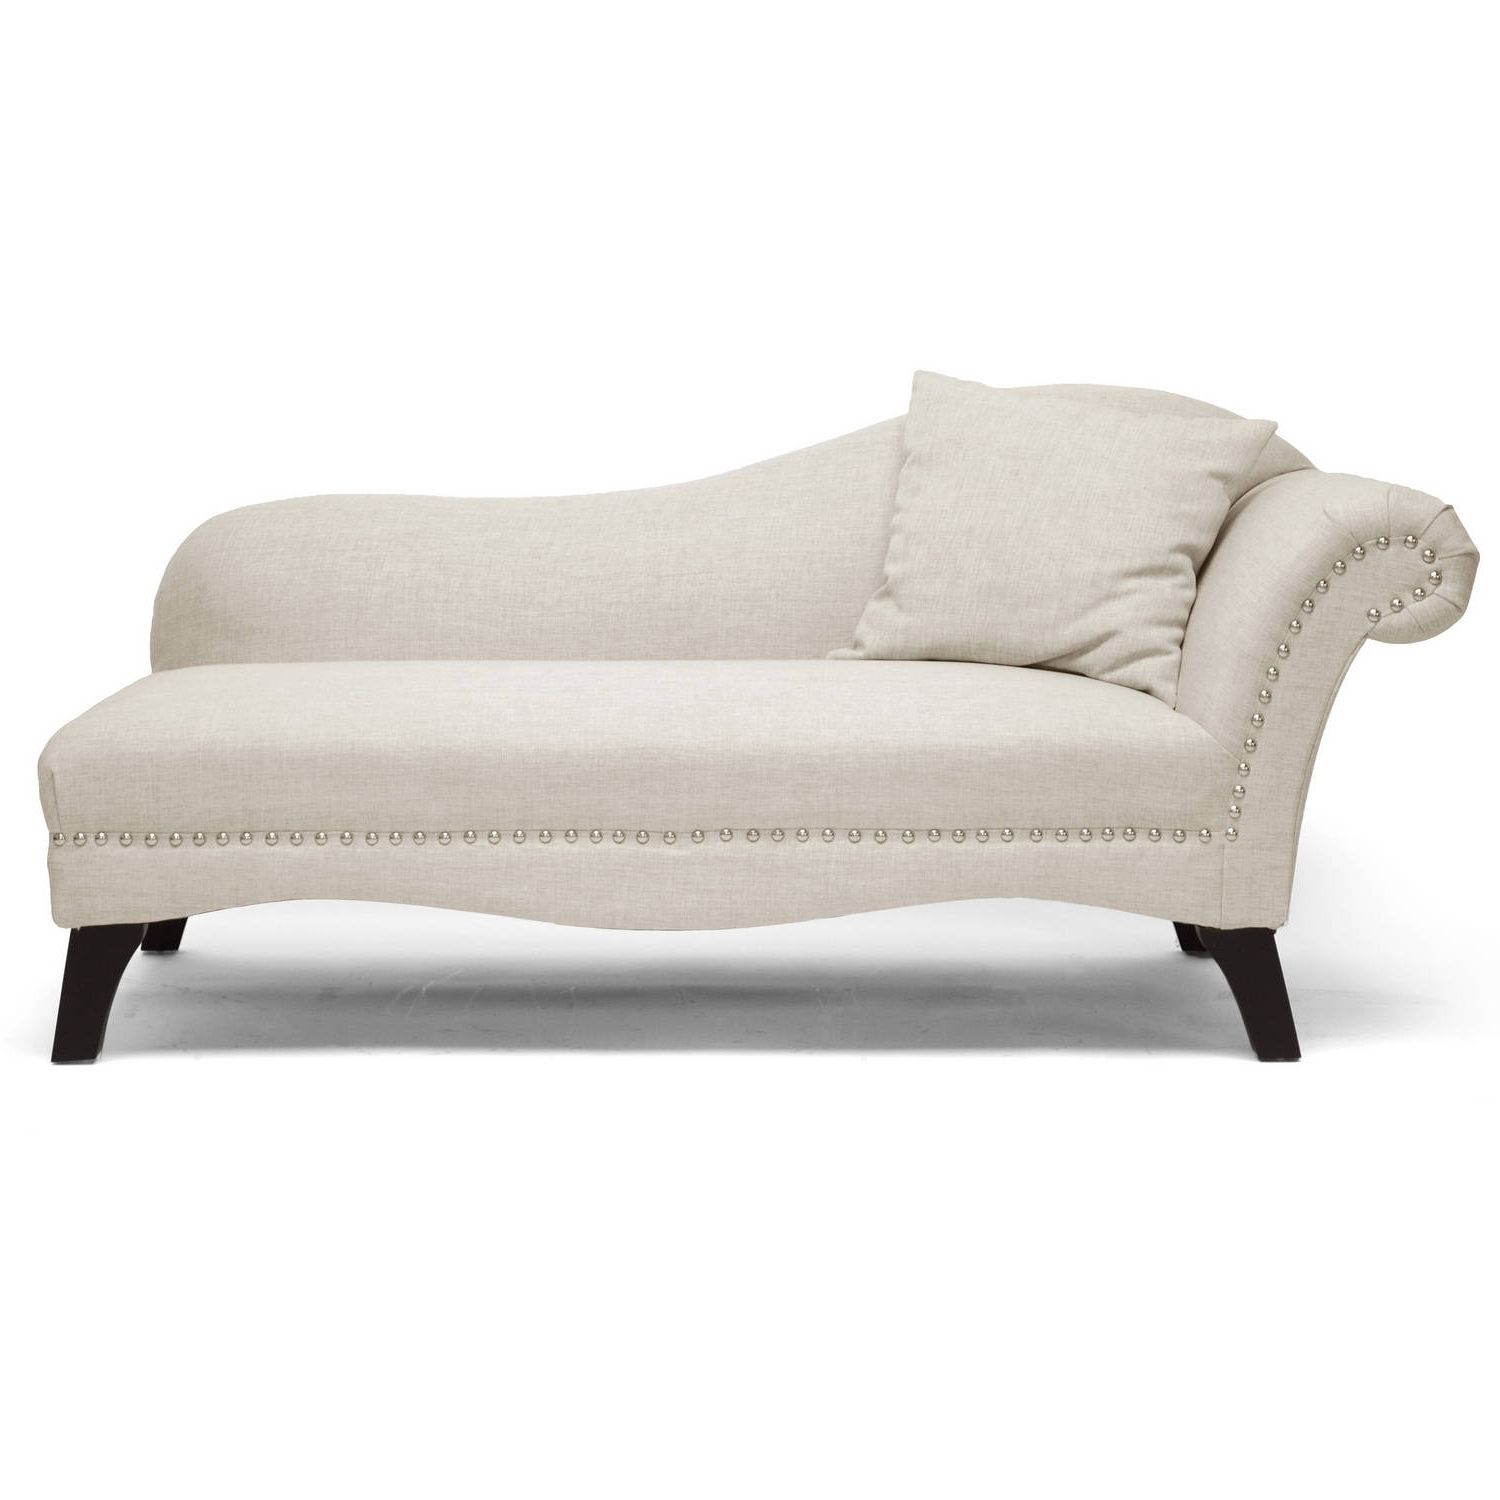 Famous Vintage Indoor Chaise Lounge Chairs For Chaise Lounges – Walmart (View 15 of 15)